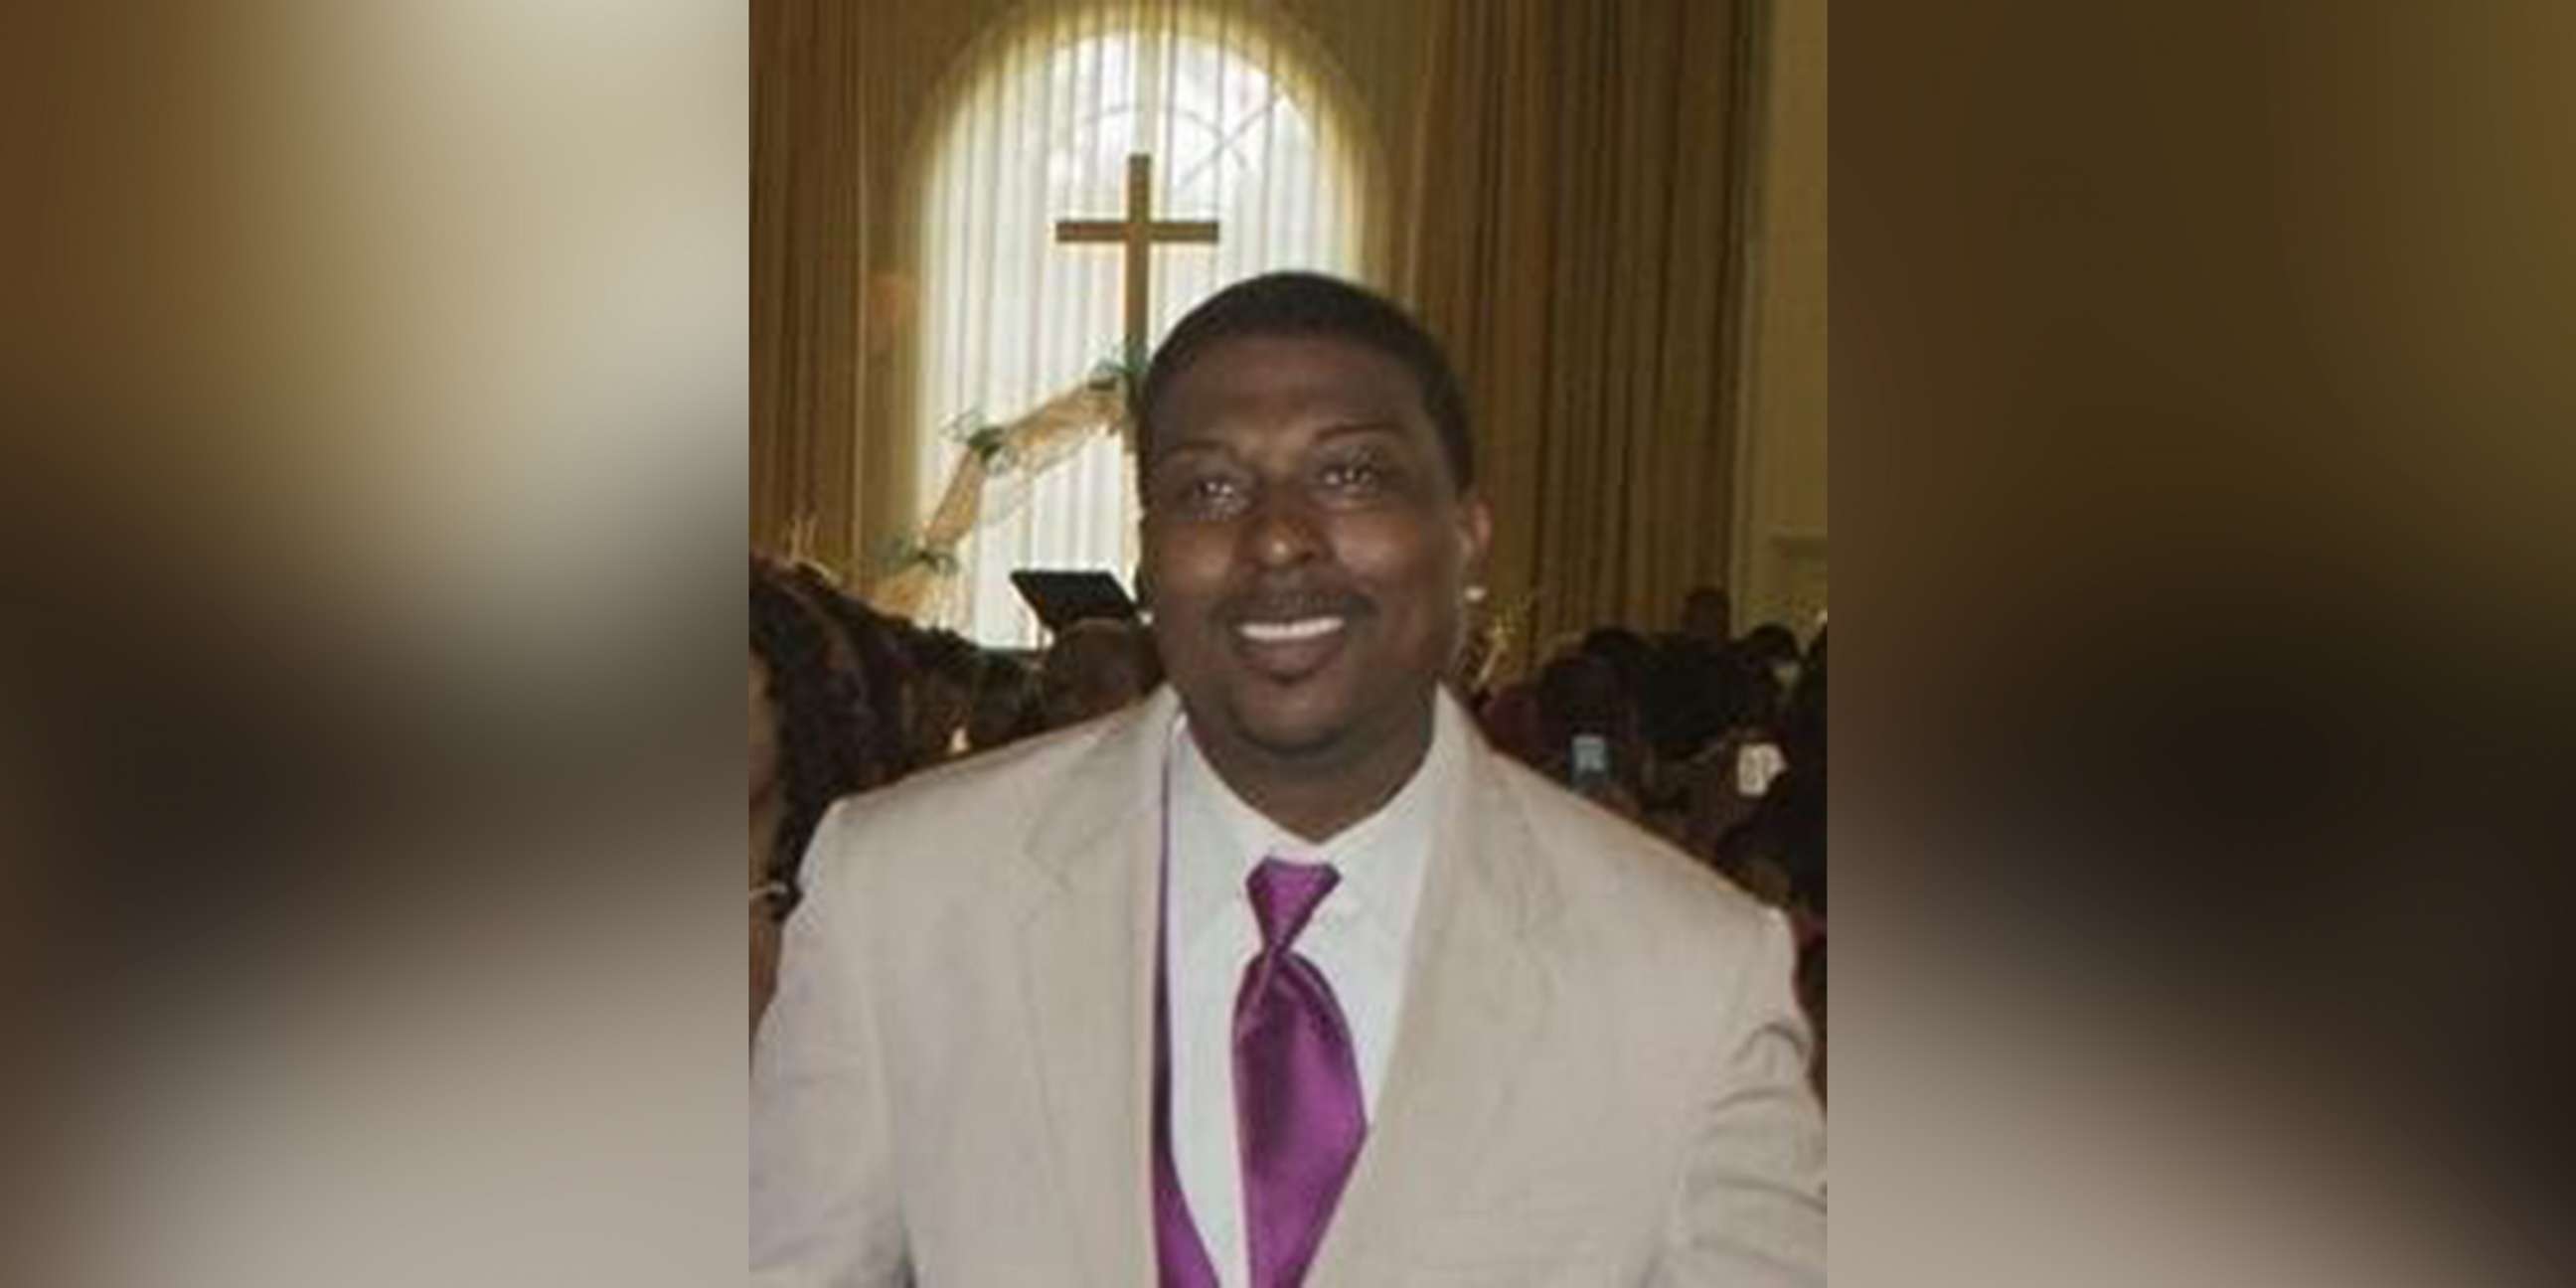 PHOTO: Quinnyon Wimberly, 36, was one of three construction workers who were killed in the New Orleans Hard Rock Hotel collapse on Oct. 12, 2019.